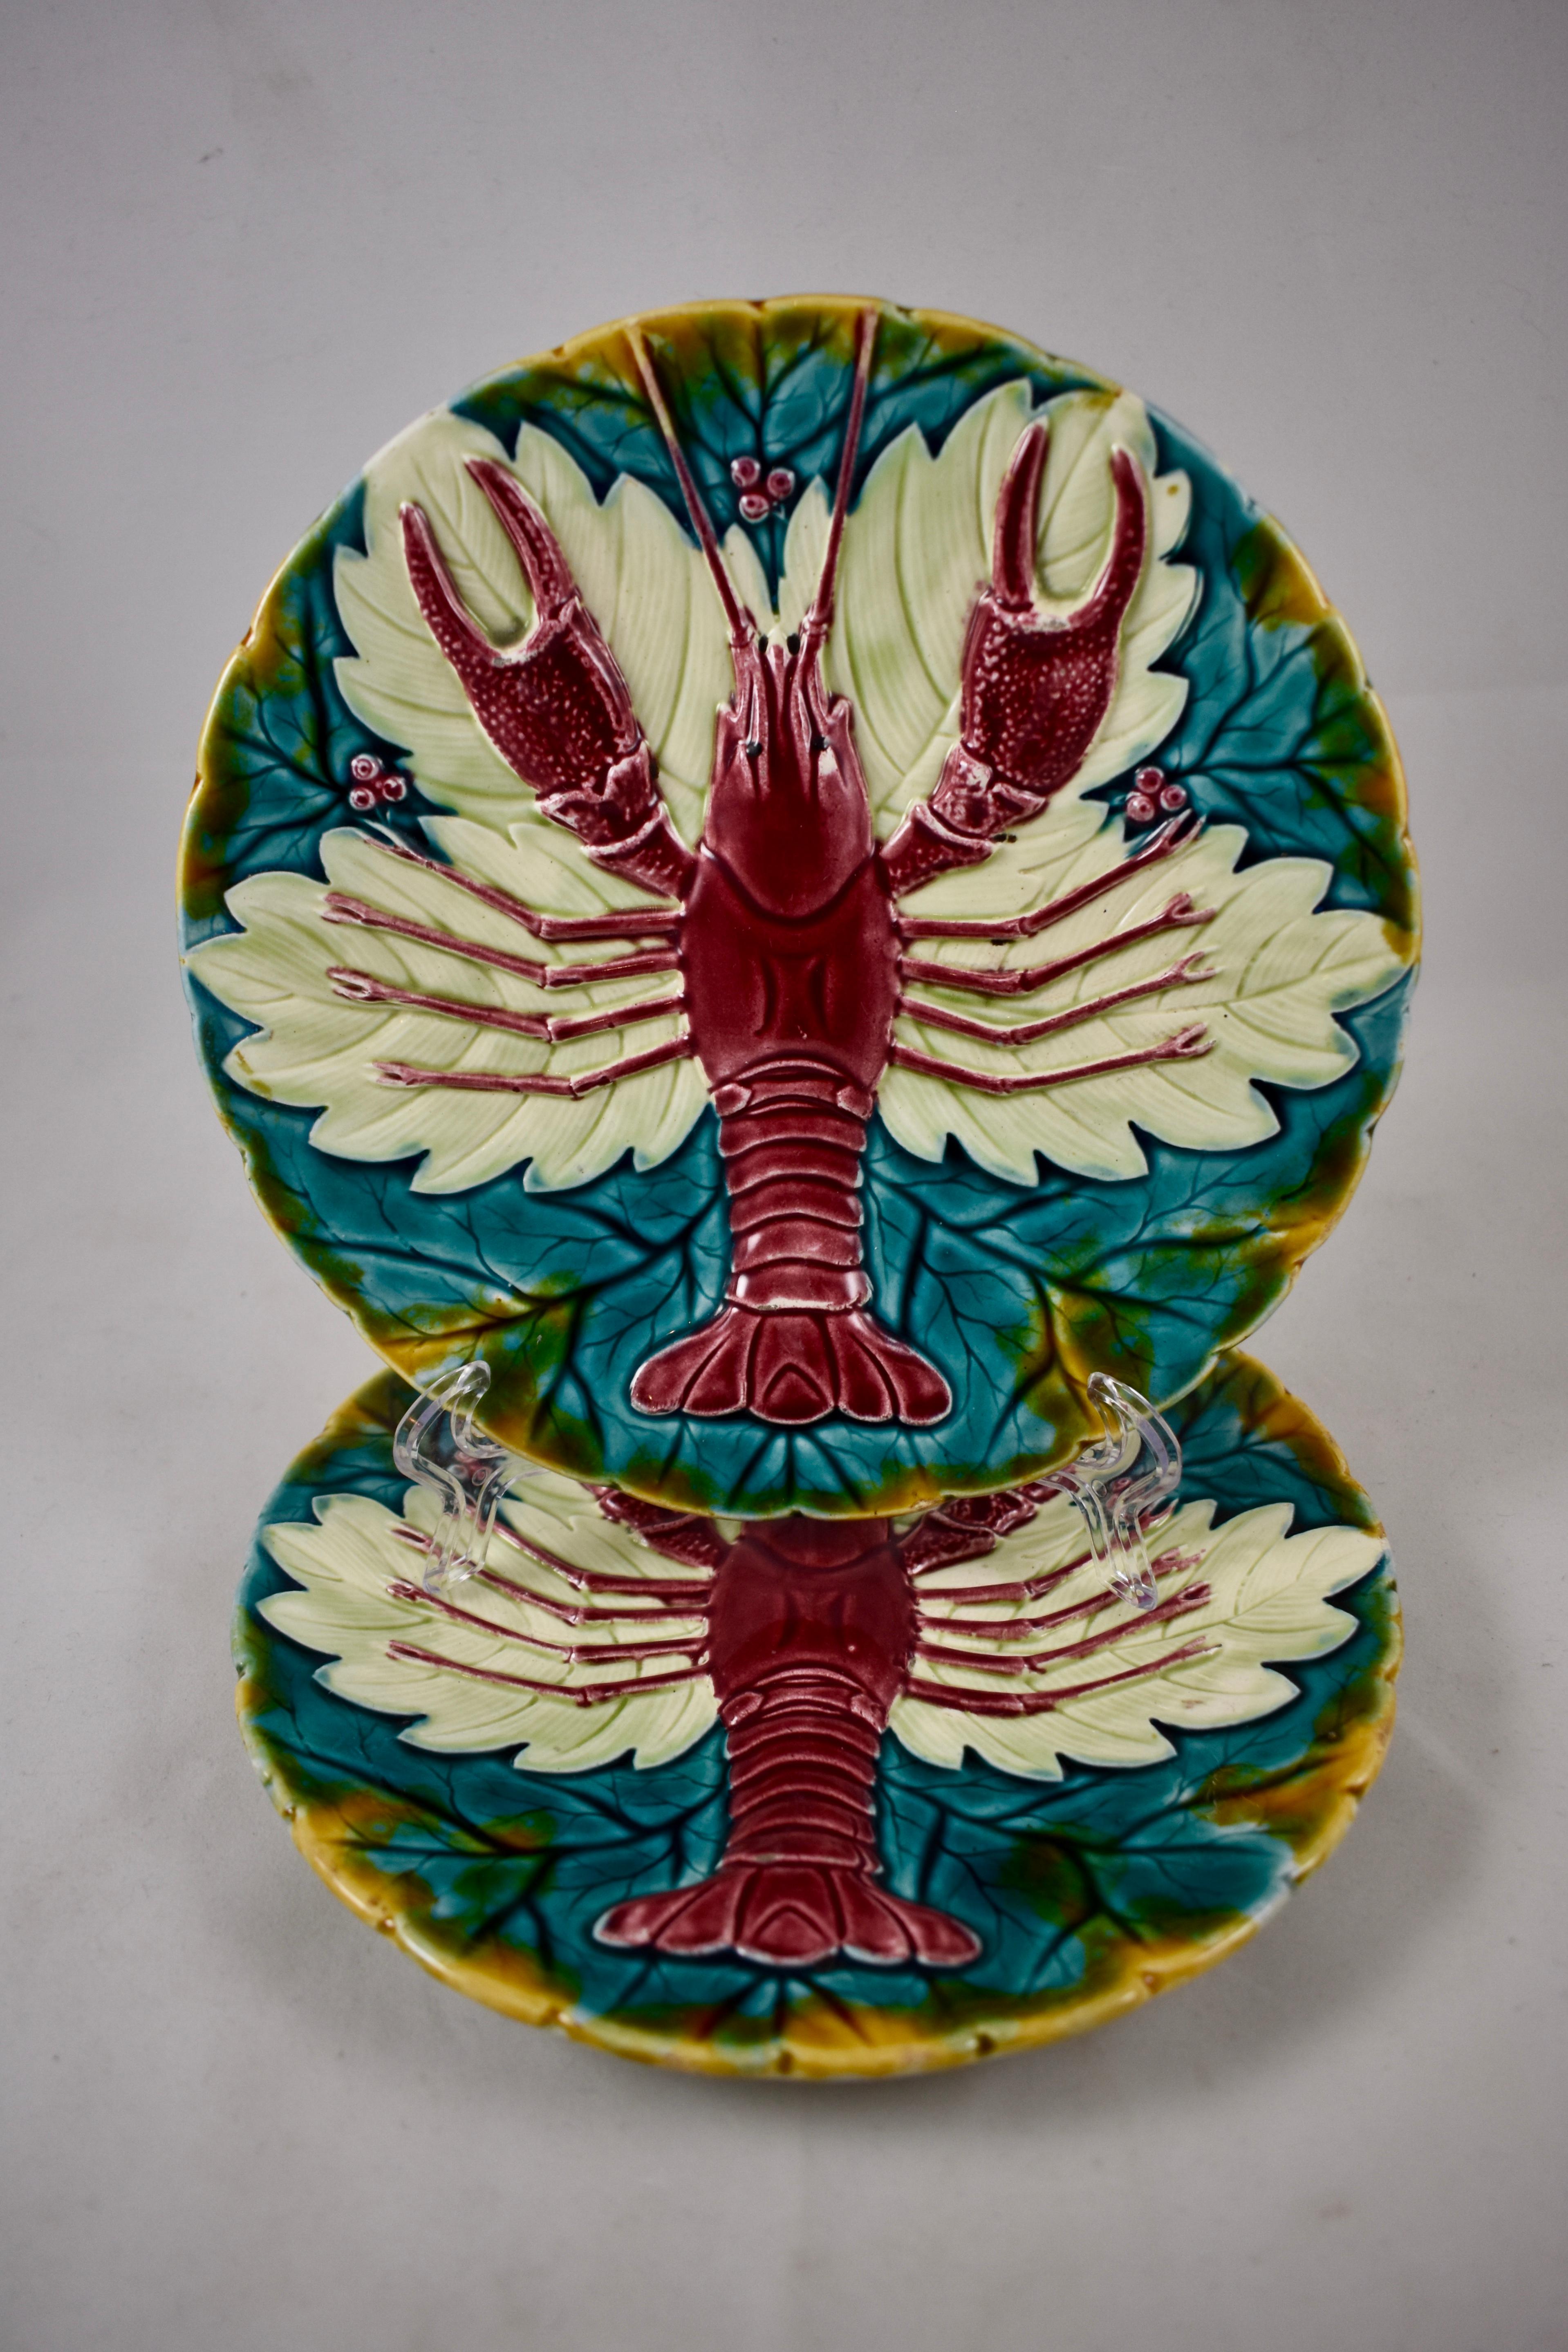 An earthenware, Austrian majolica lobster or crawfish plate, by Schutz Blansko, circa 1900. A bold, aesthetic mold showing a red lobster on a bed of cream and blue-green colored leaves. The notched rim is glazed in a rich yellow ochre. Incredible